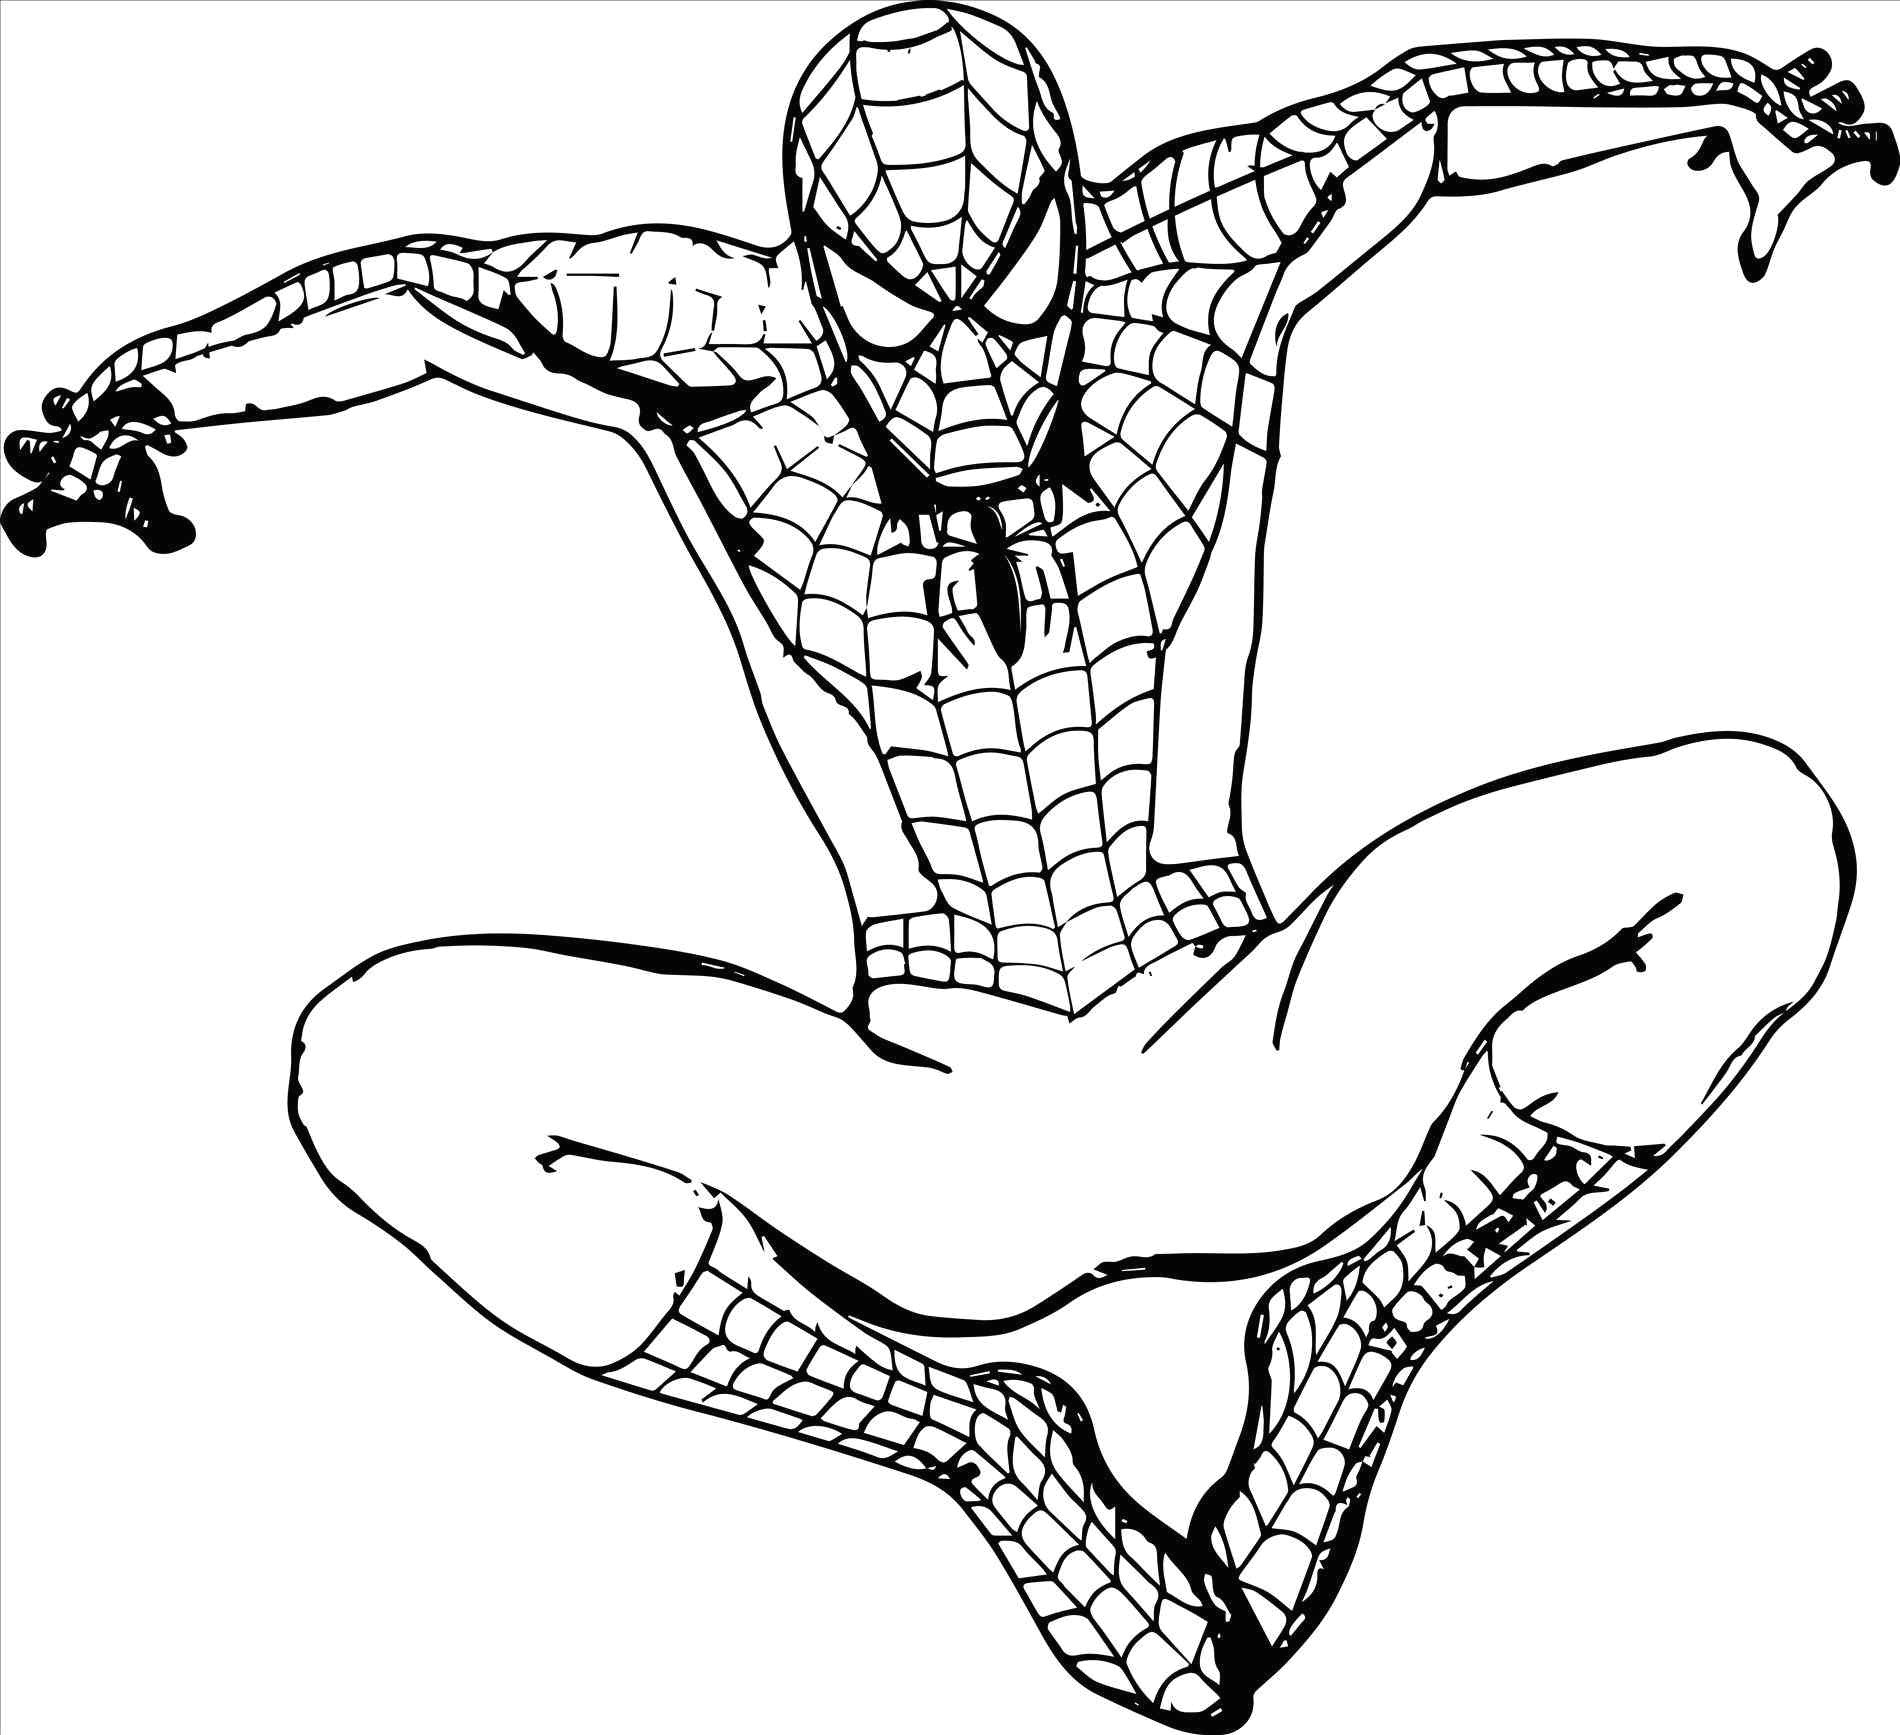 Easy Drawings O Superheroes Easy to Draw Spiderman Coloring Pages Luxury 0 0d